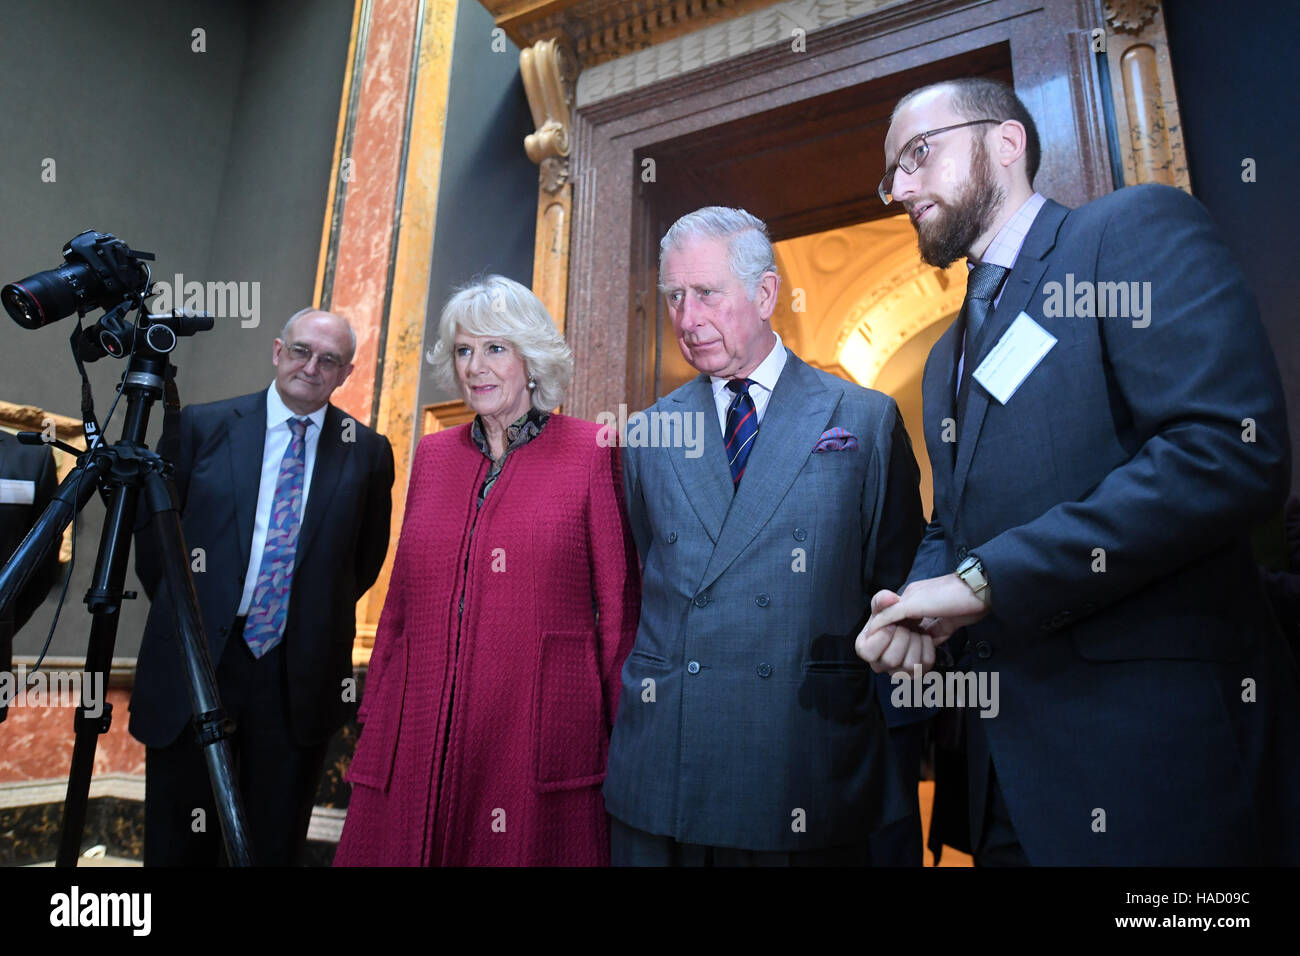 The Prince of Wales and the Duchess of Cornwall are given a demonstration of digitisation techniques during a visit to the University of Cambridge's Fitzwilliam Museum to mark its bicentenary and to celebrate the 600th anniversary of the Cambridge University Library. Stock Photo